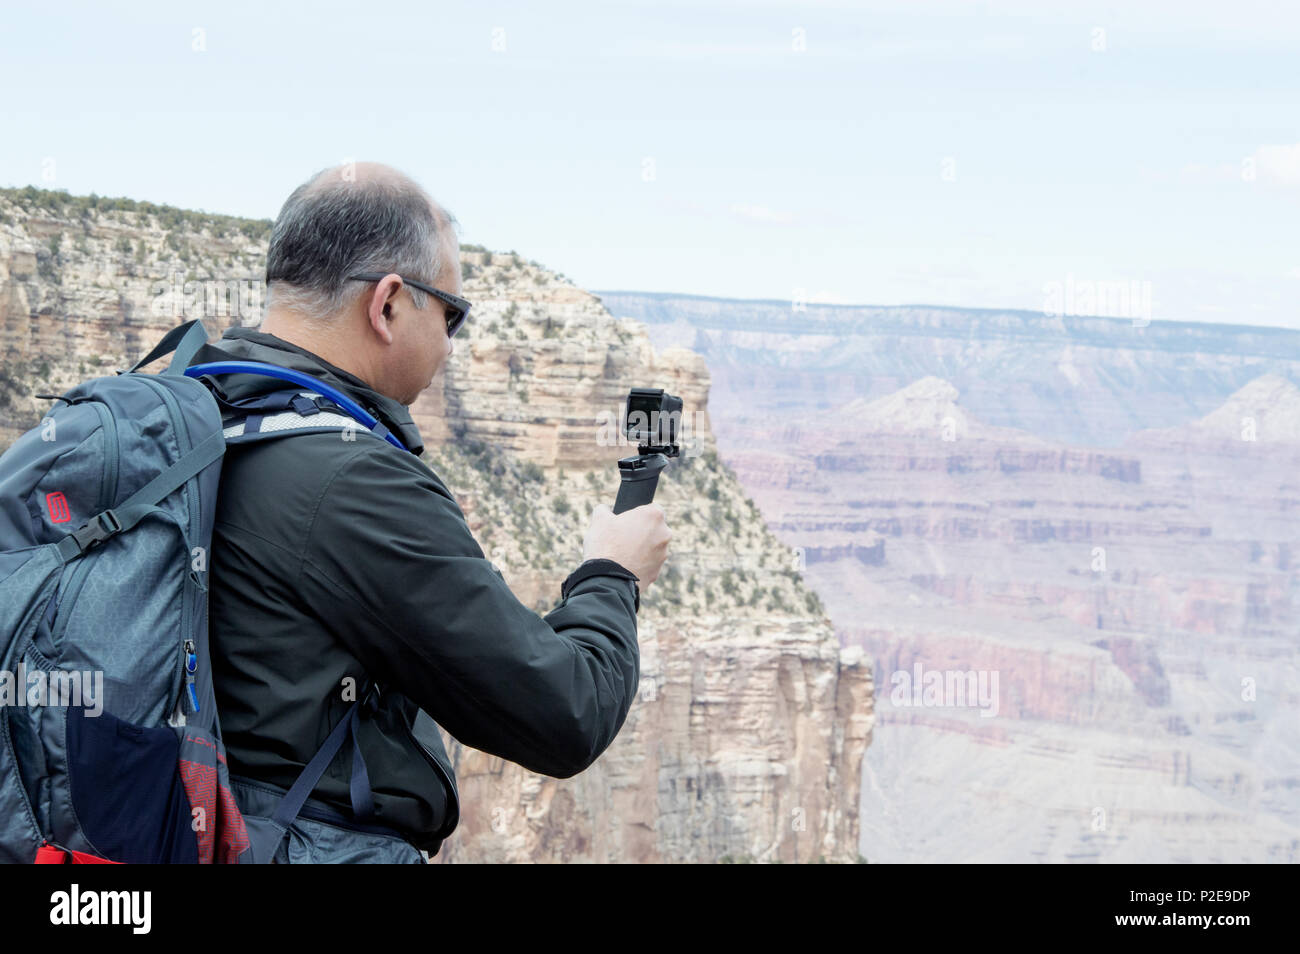 A man filming the Grand Canyon with a GoPro camera. Stock Photo